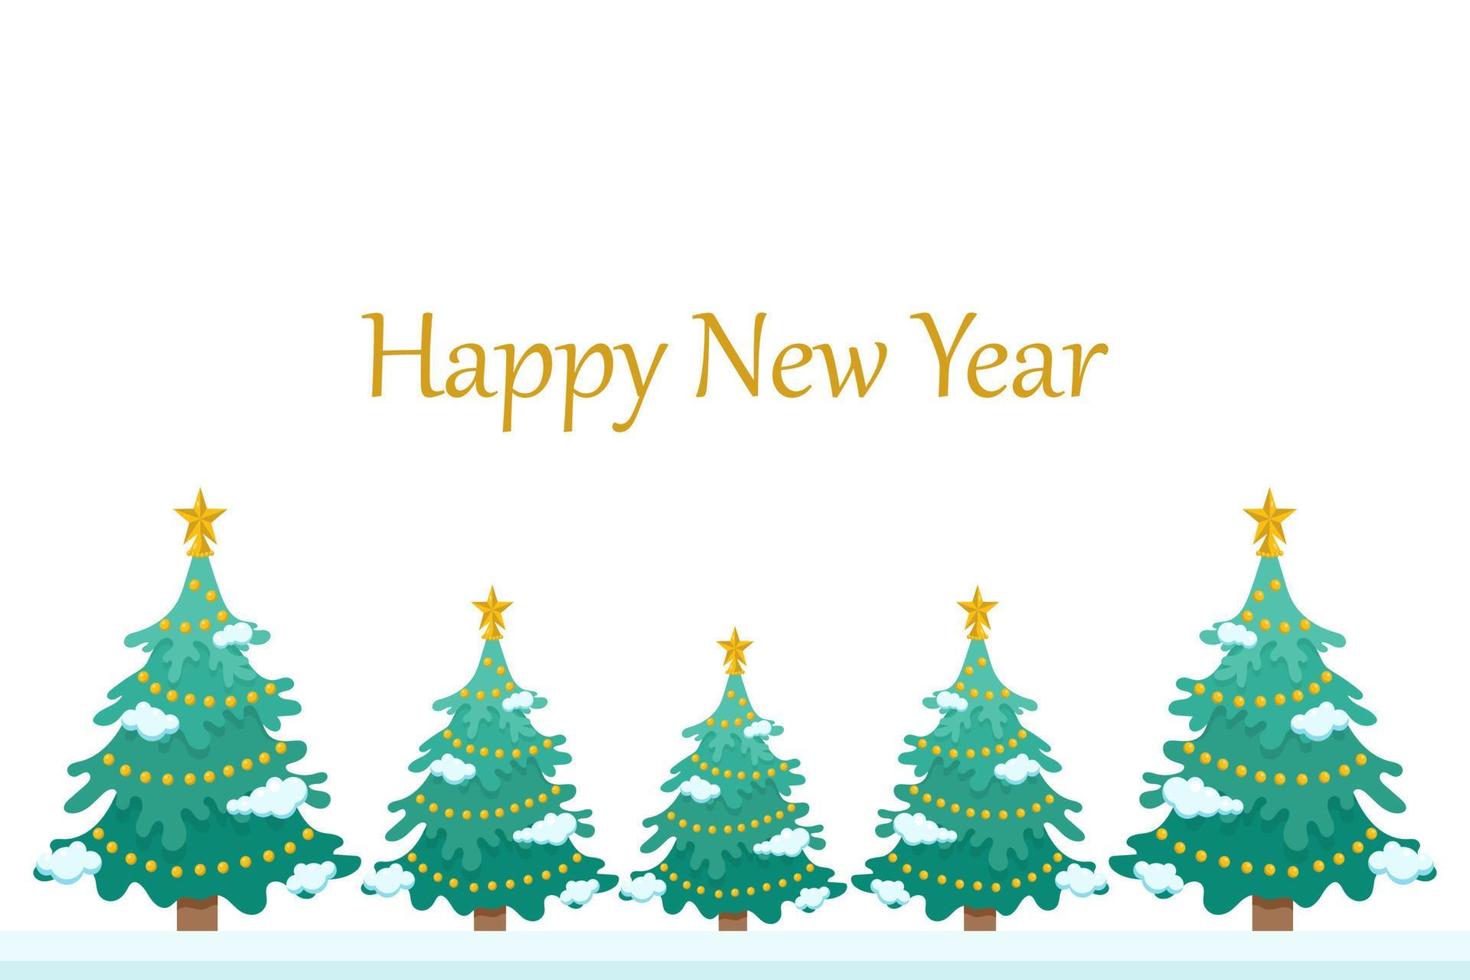 Happy New Year banner with Christmas trees. vector illustration